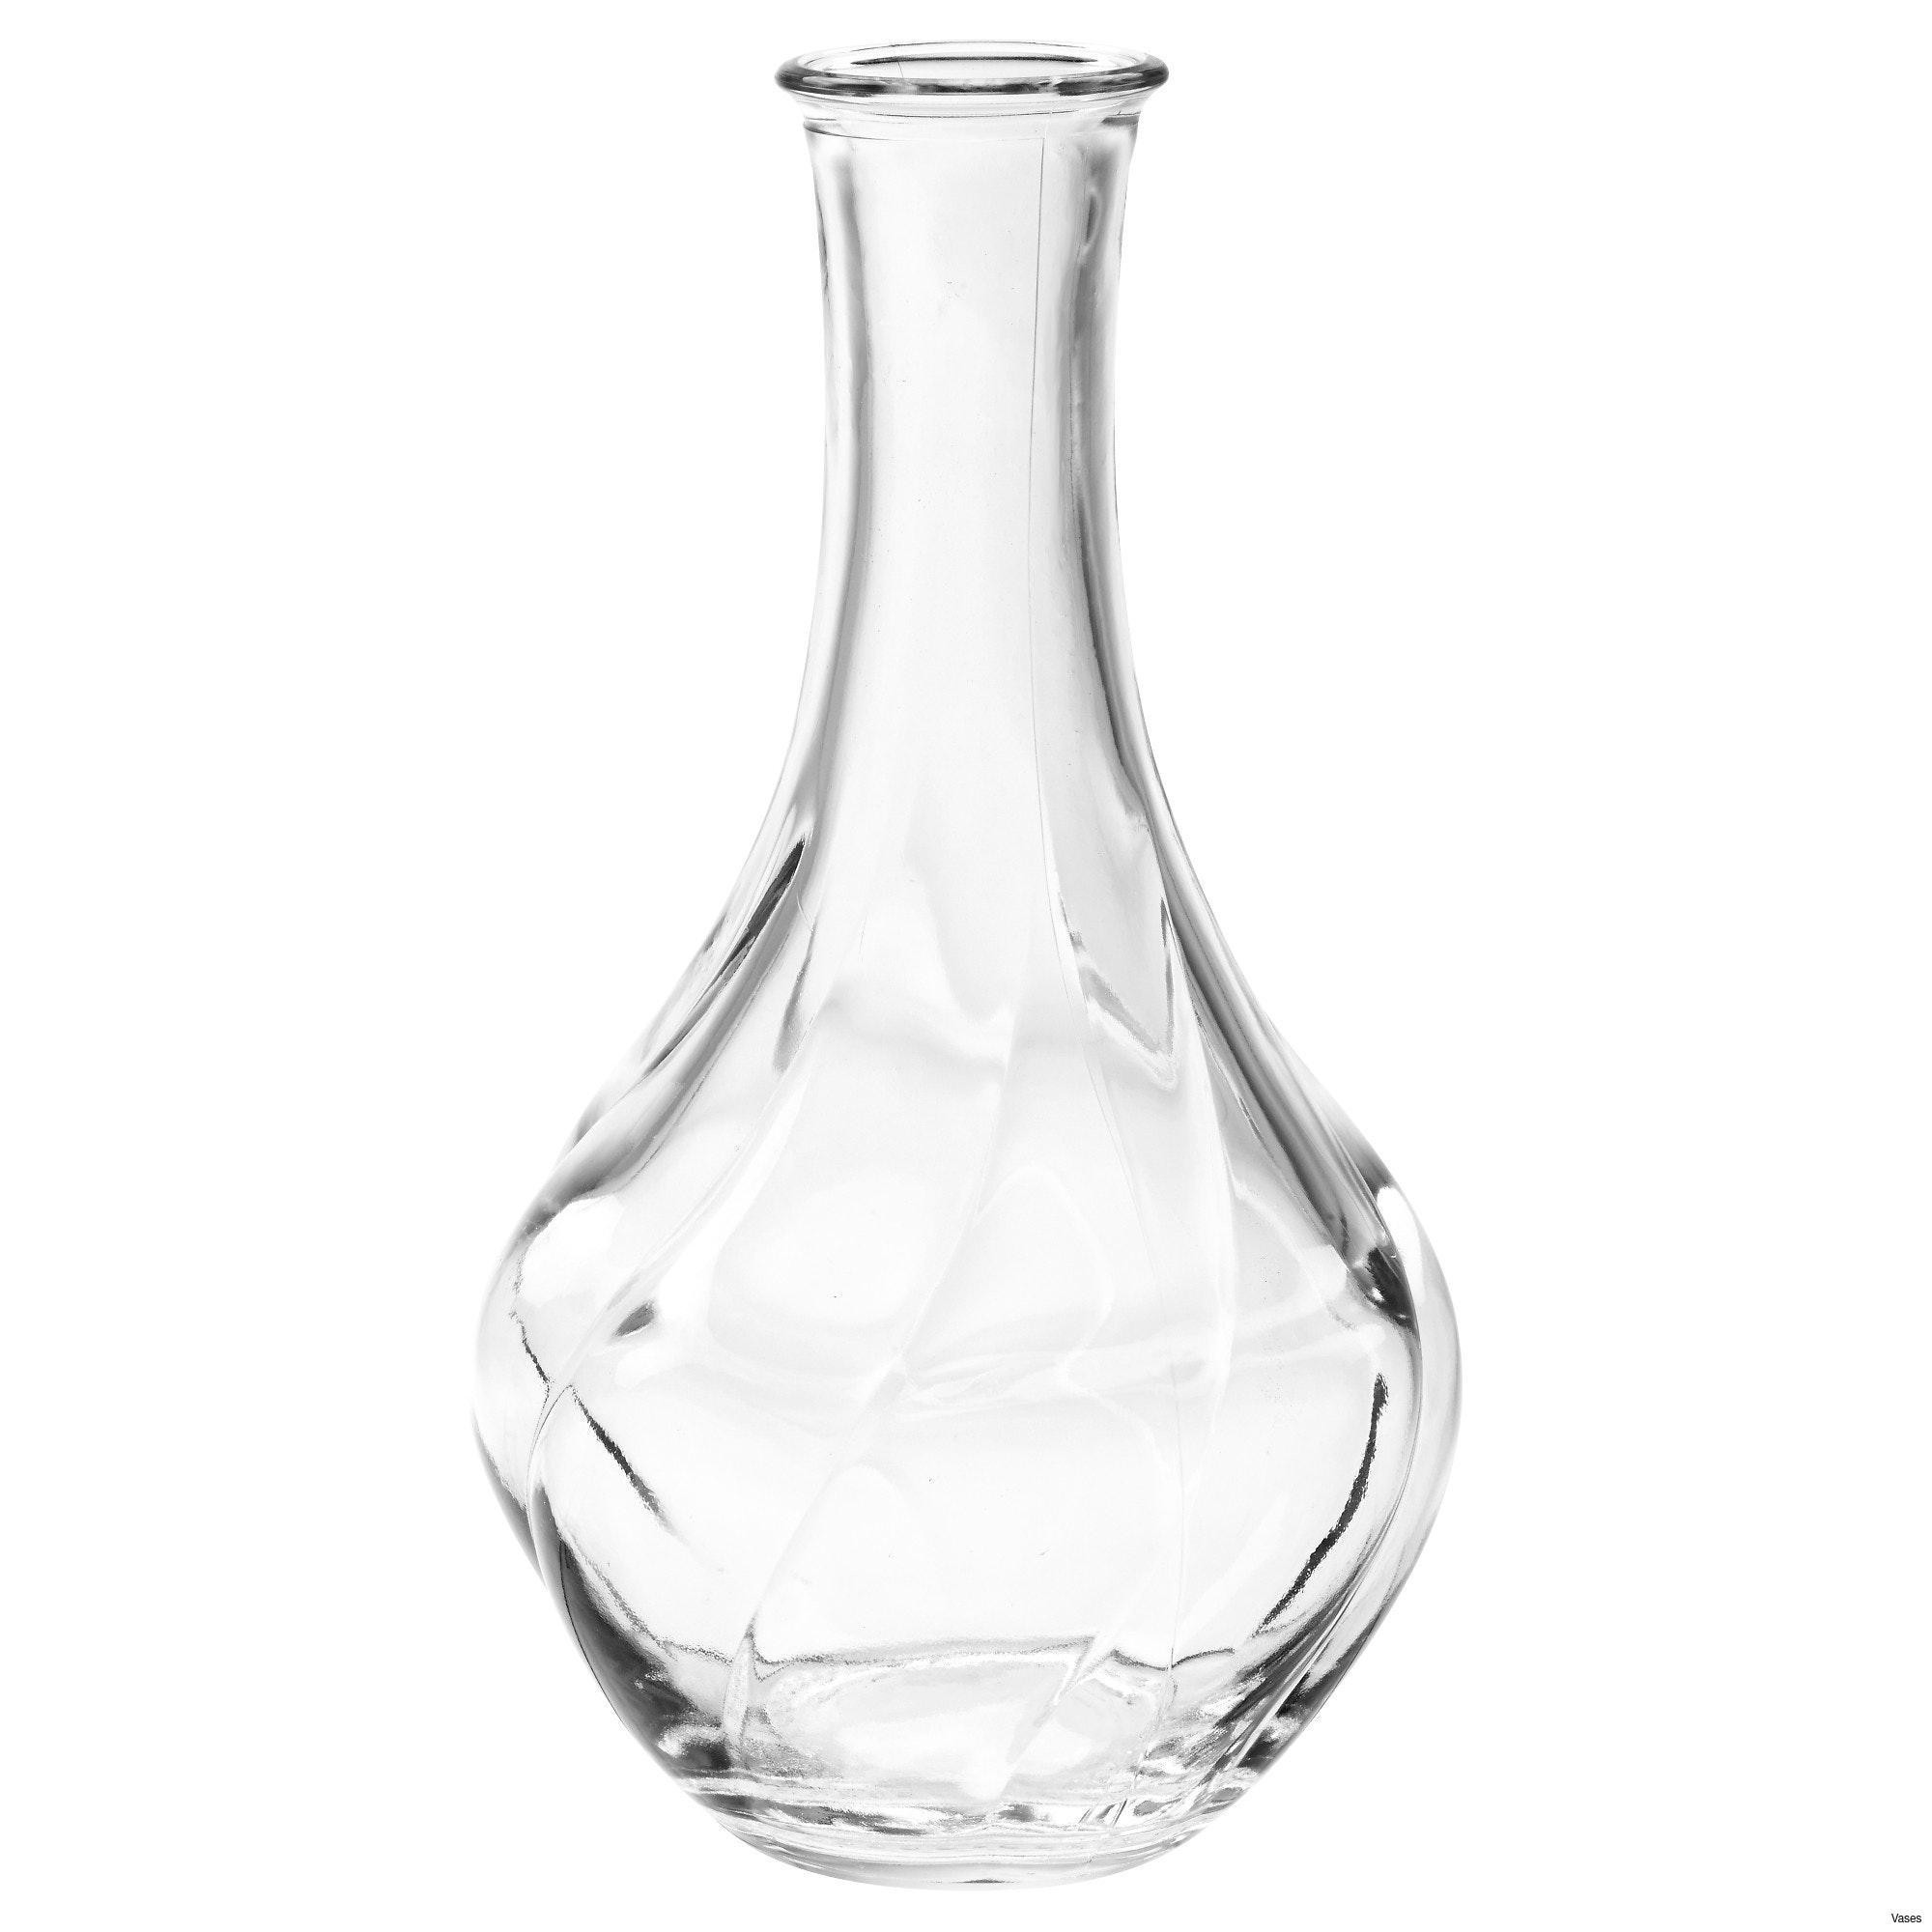 10 Recommended Large Cylinder Vases Cheap 2024 free download large cylinder vases cheap of large glass vase gallery living room glass vases fresh clear vase 0d for large glass vase gallery living room glass vases fresh clear vase 0d tags amazing and o